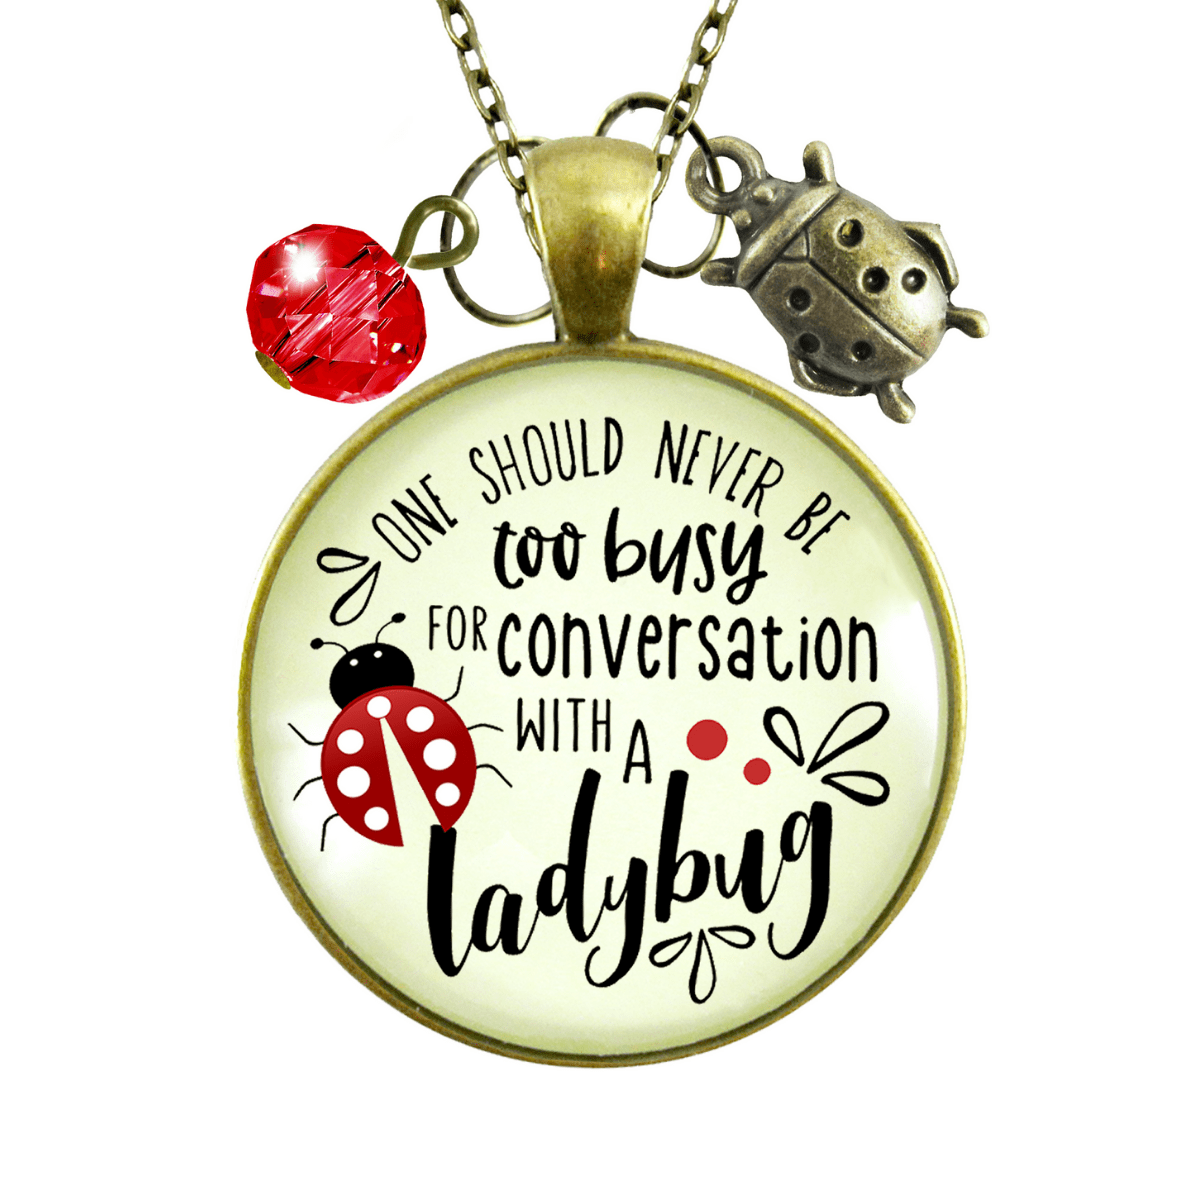 Ladybug Necklace Never Too Busy Friendship Quote Gardener Jewelry - Gutsy Goodness